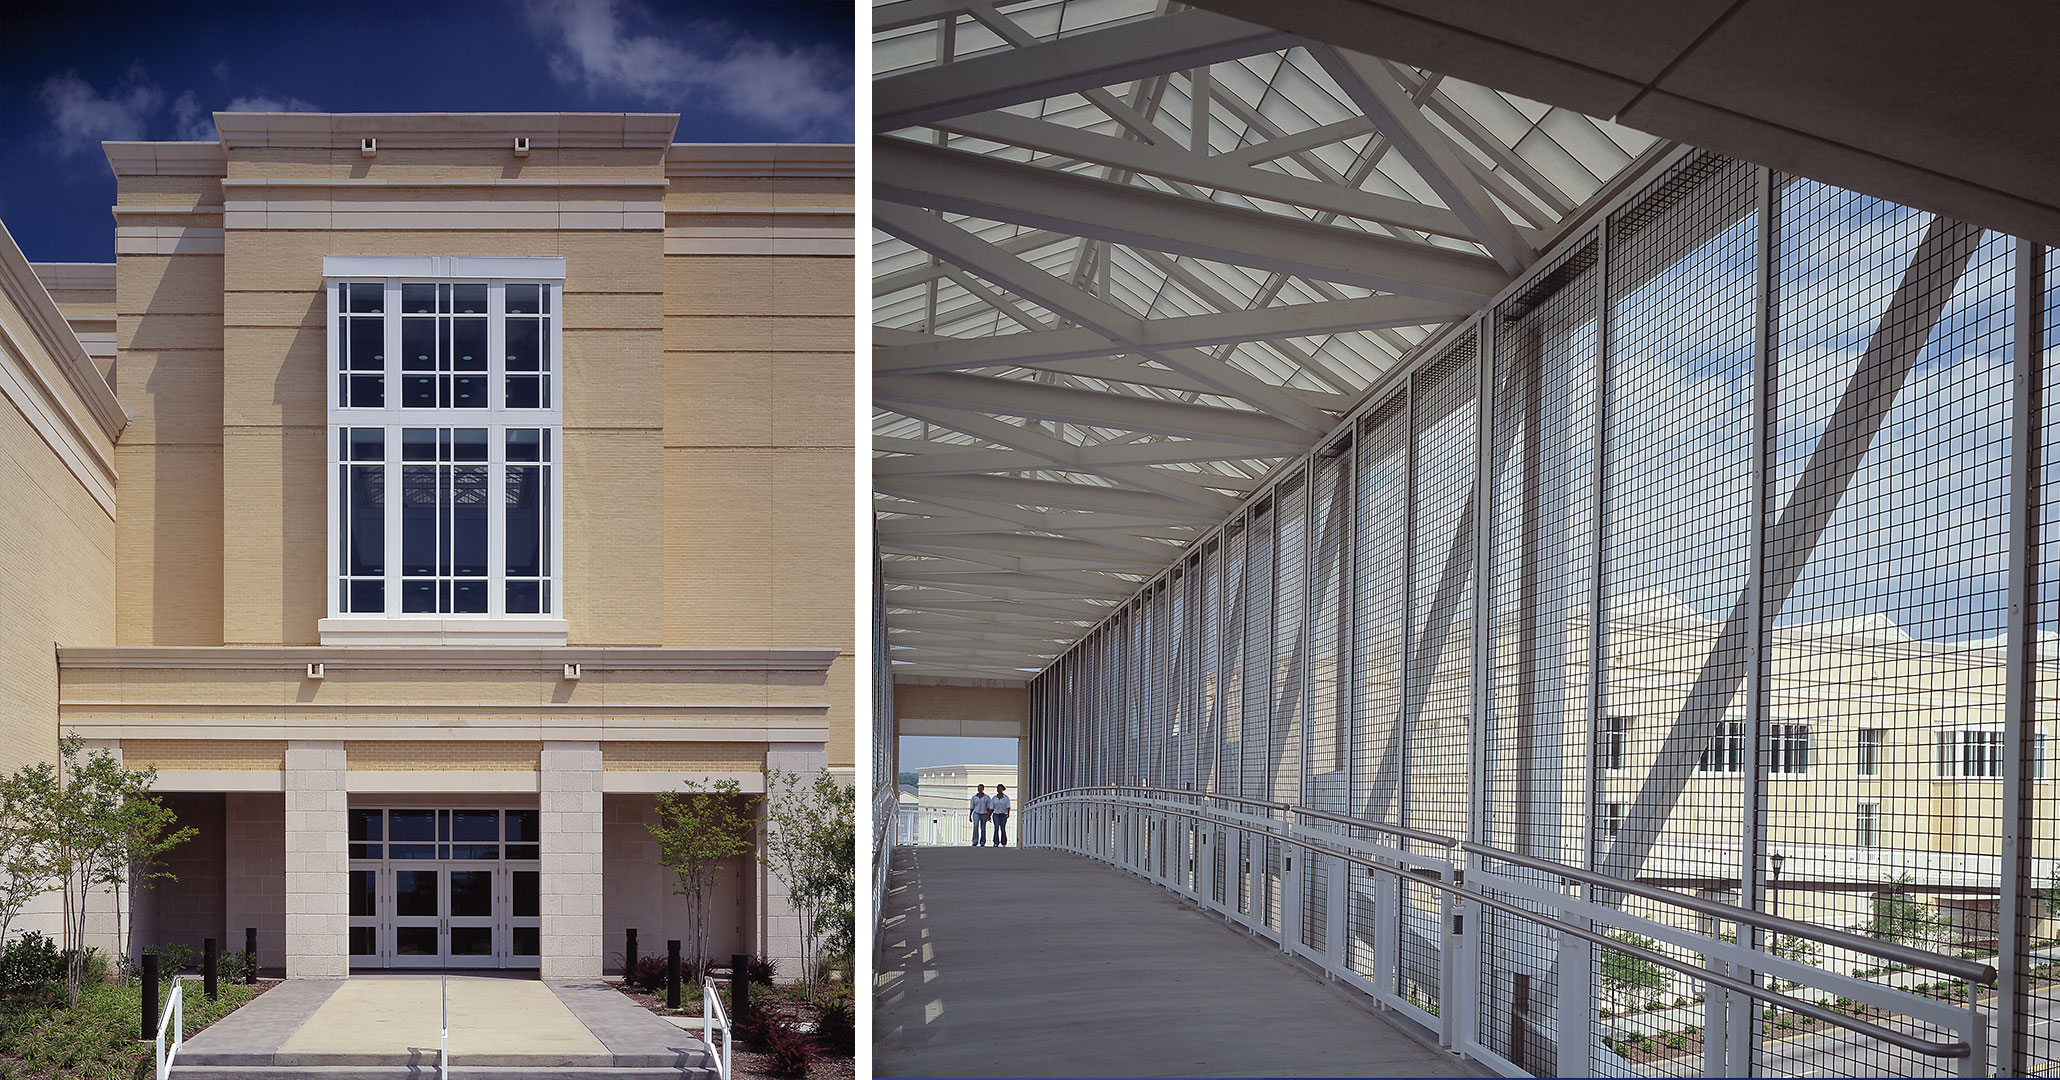 UofSC worked with Boudreaux designers to build the Strom Thurmond Wellness Center in downtown Columbia, SC.